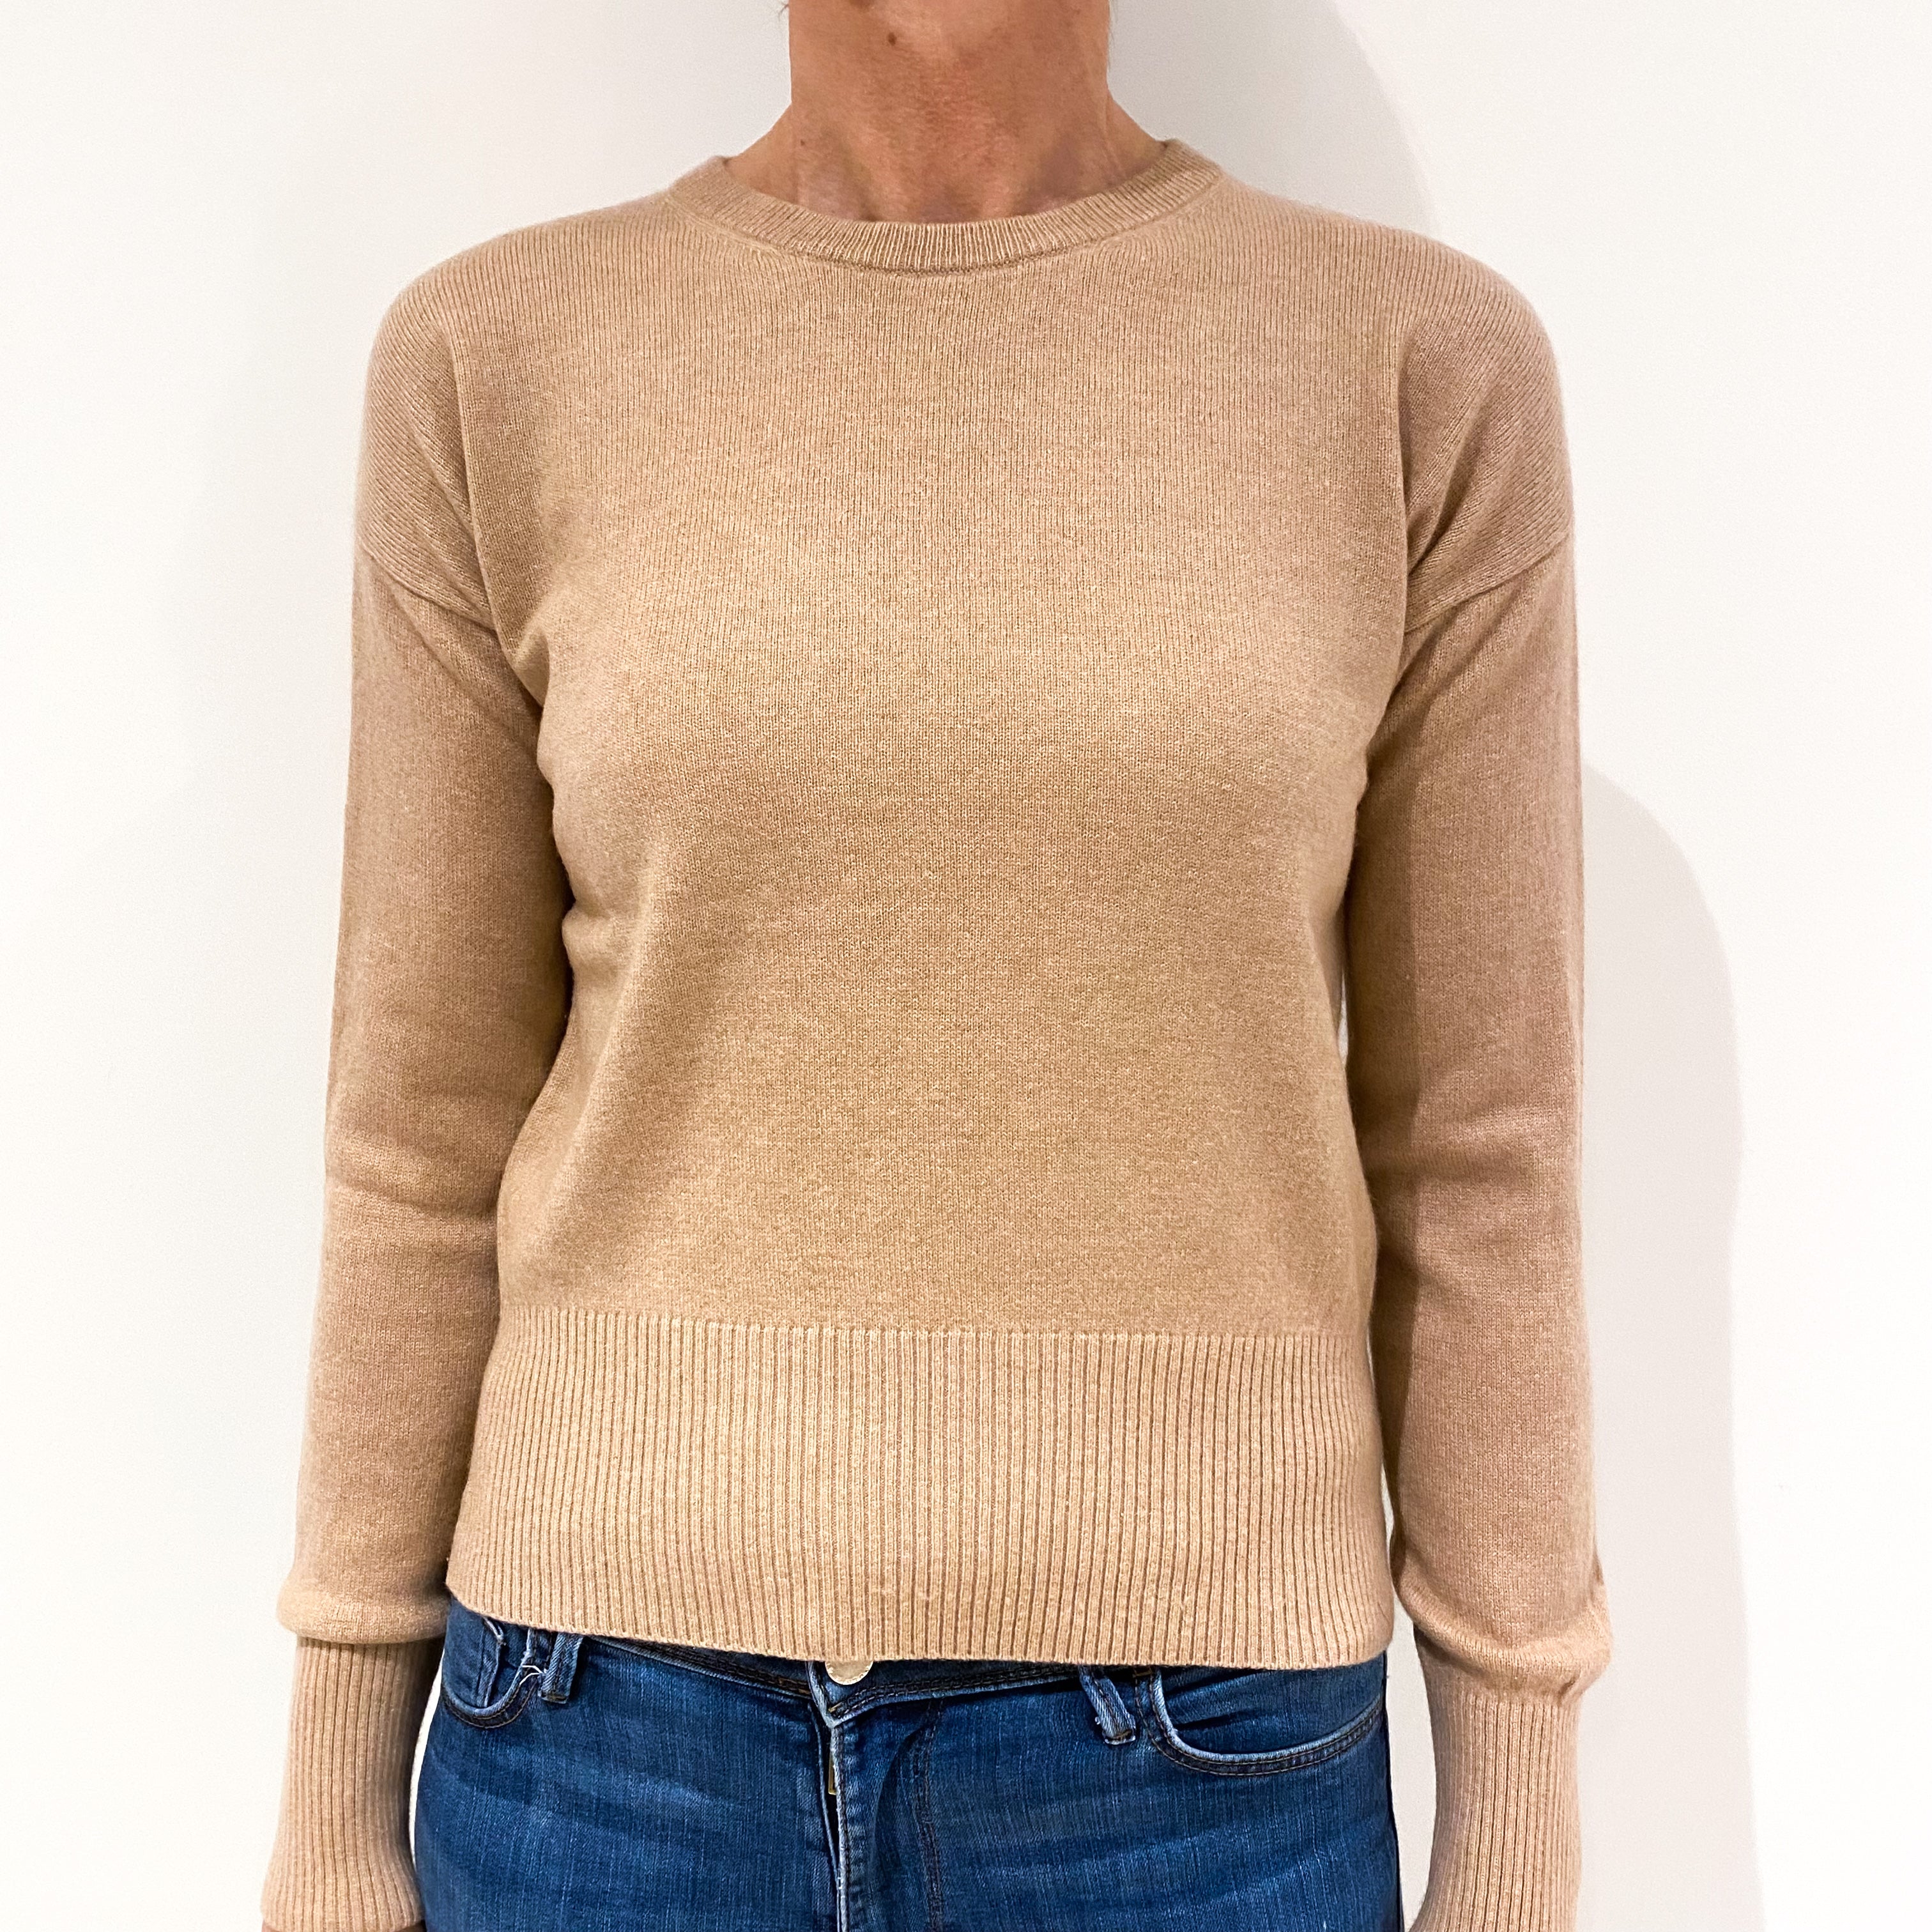 Toffee Caramel Brown Cashmere Crew Neck Jumper Small